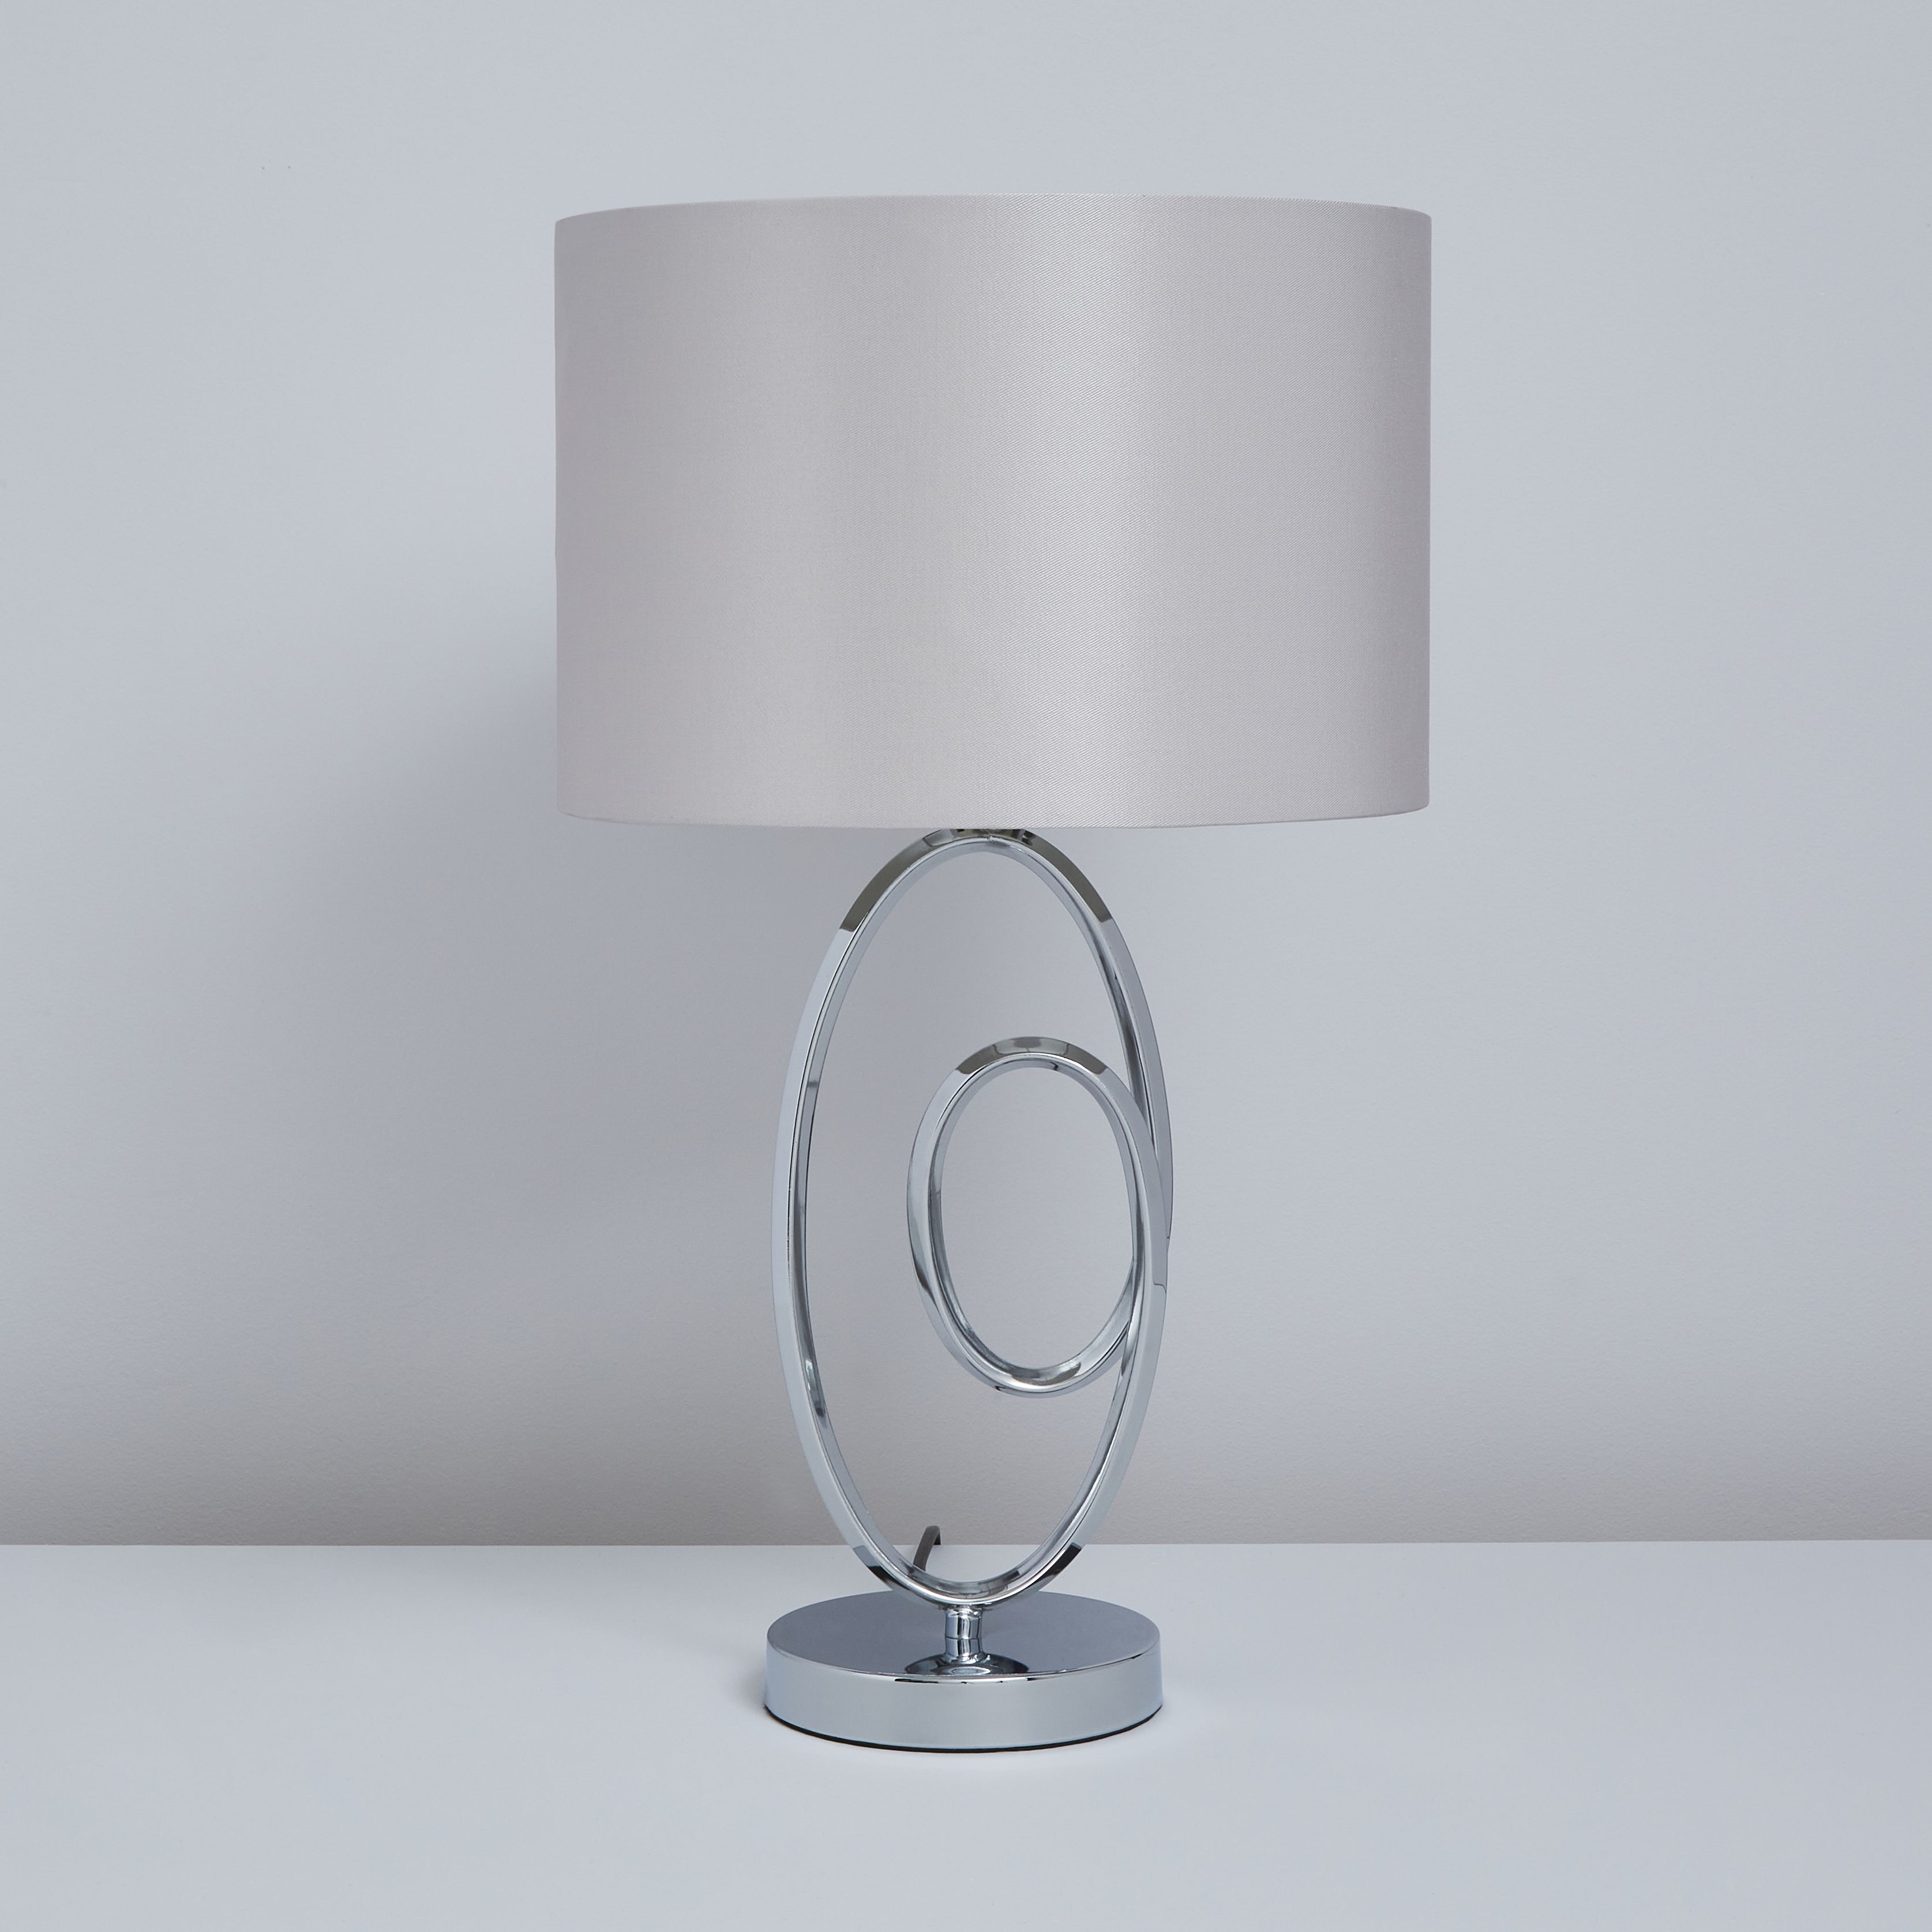 Inlight Hercule Spiral Polished Silver effect Table lamp